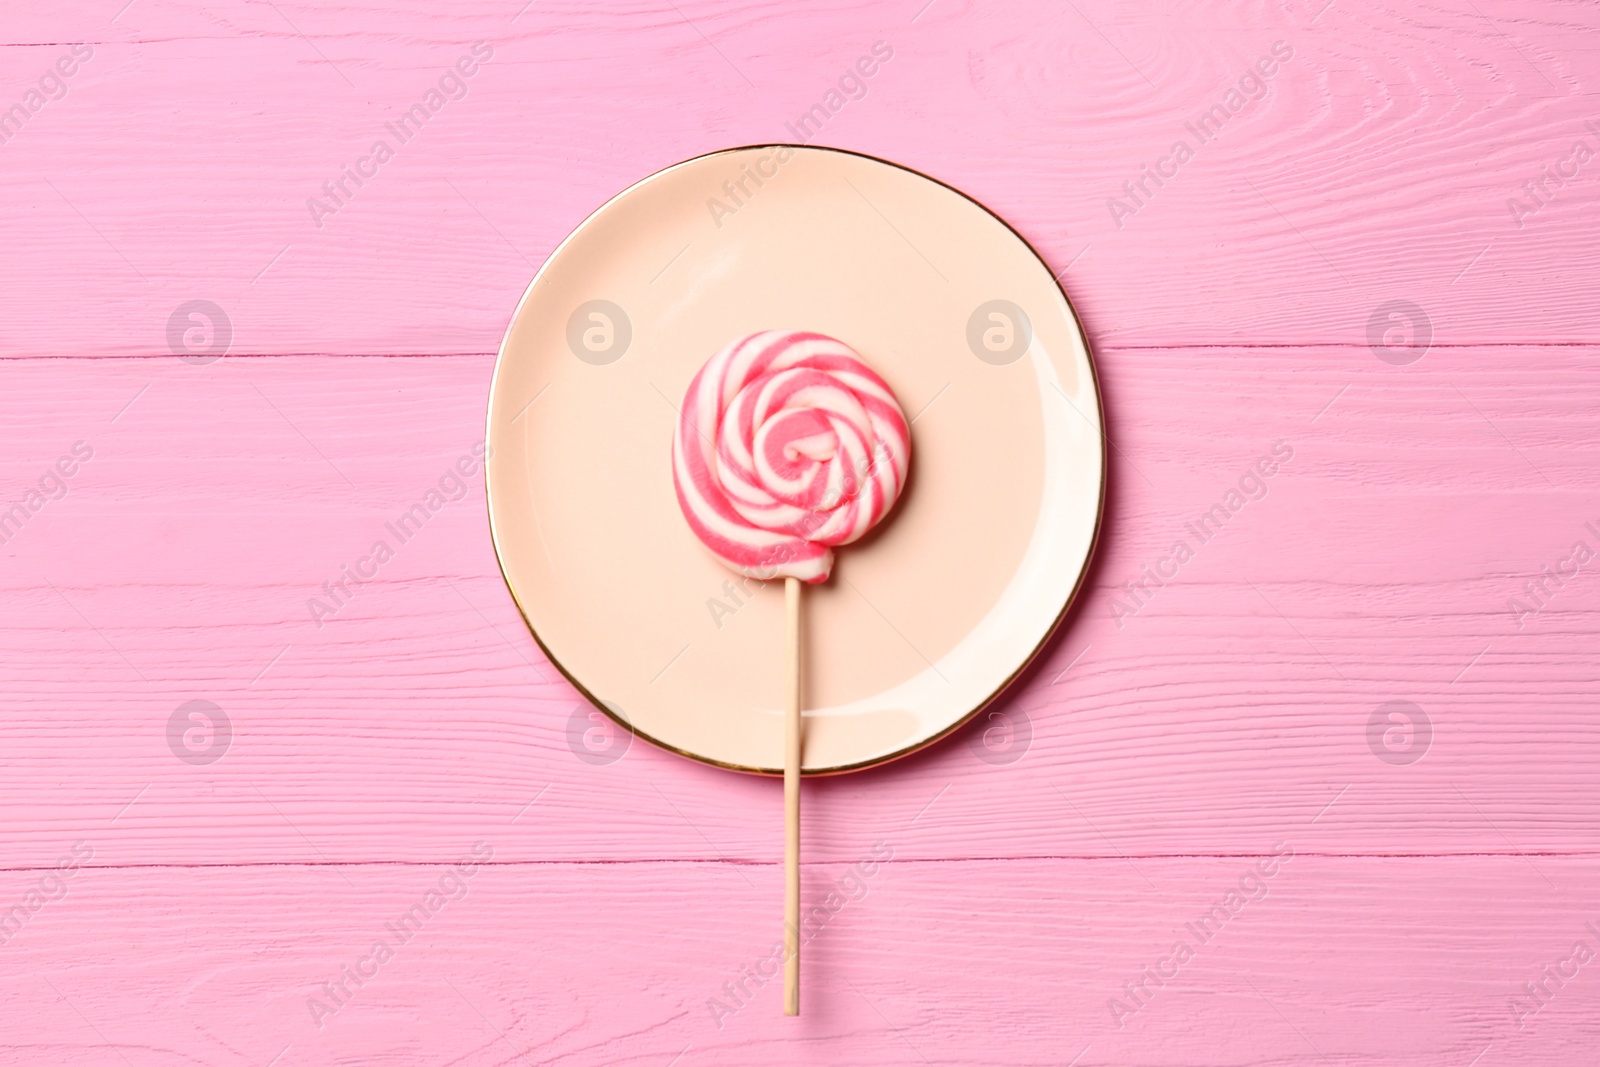 Photo of Plate with tasty sweet lollipop on pink wooden table, top view